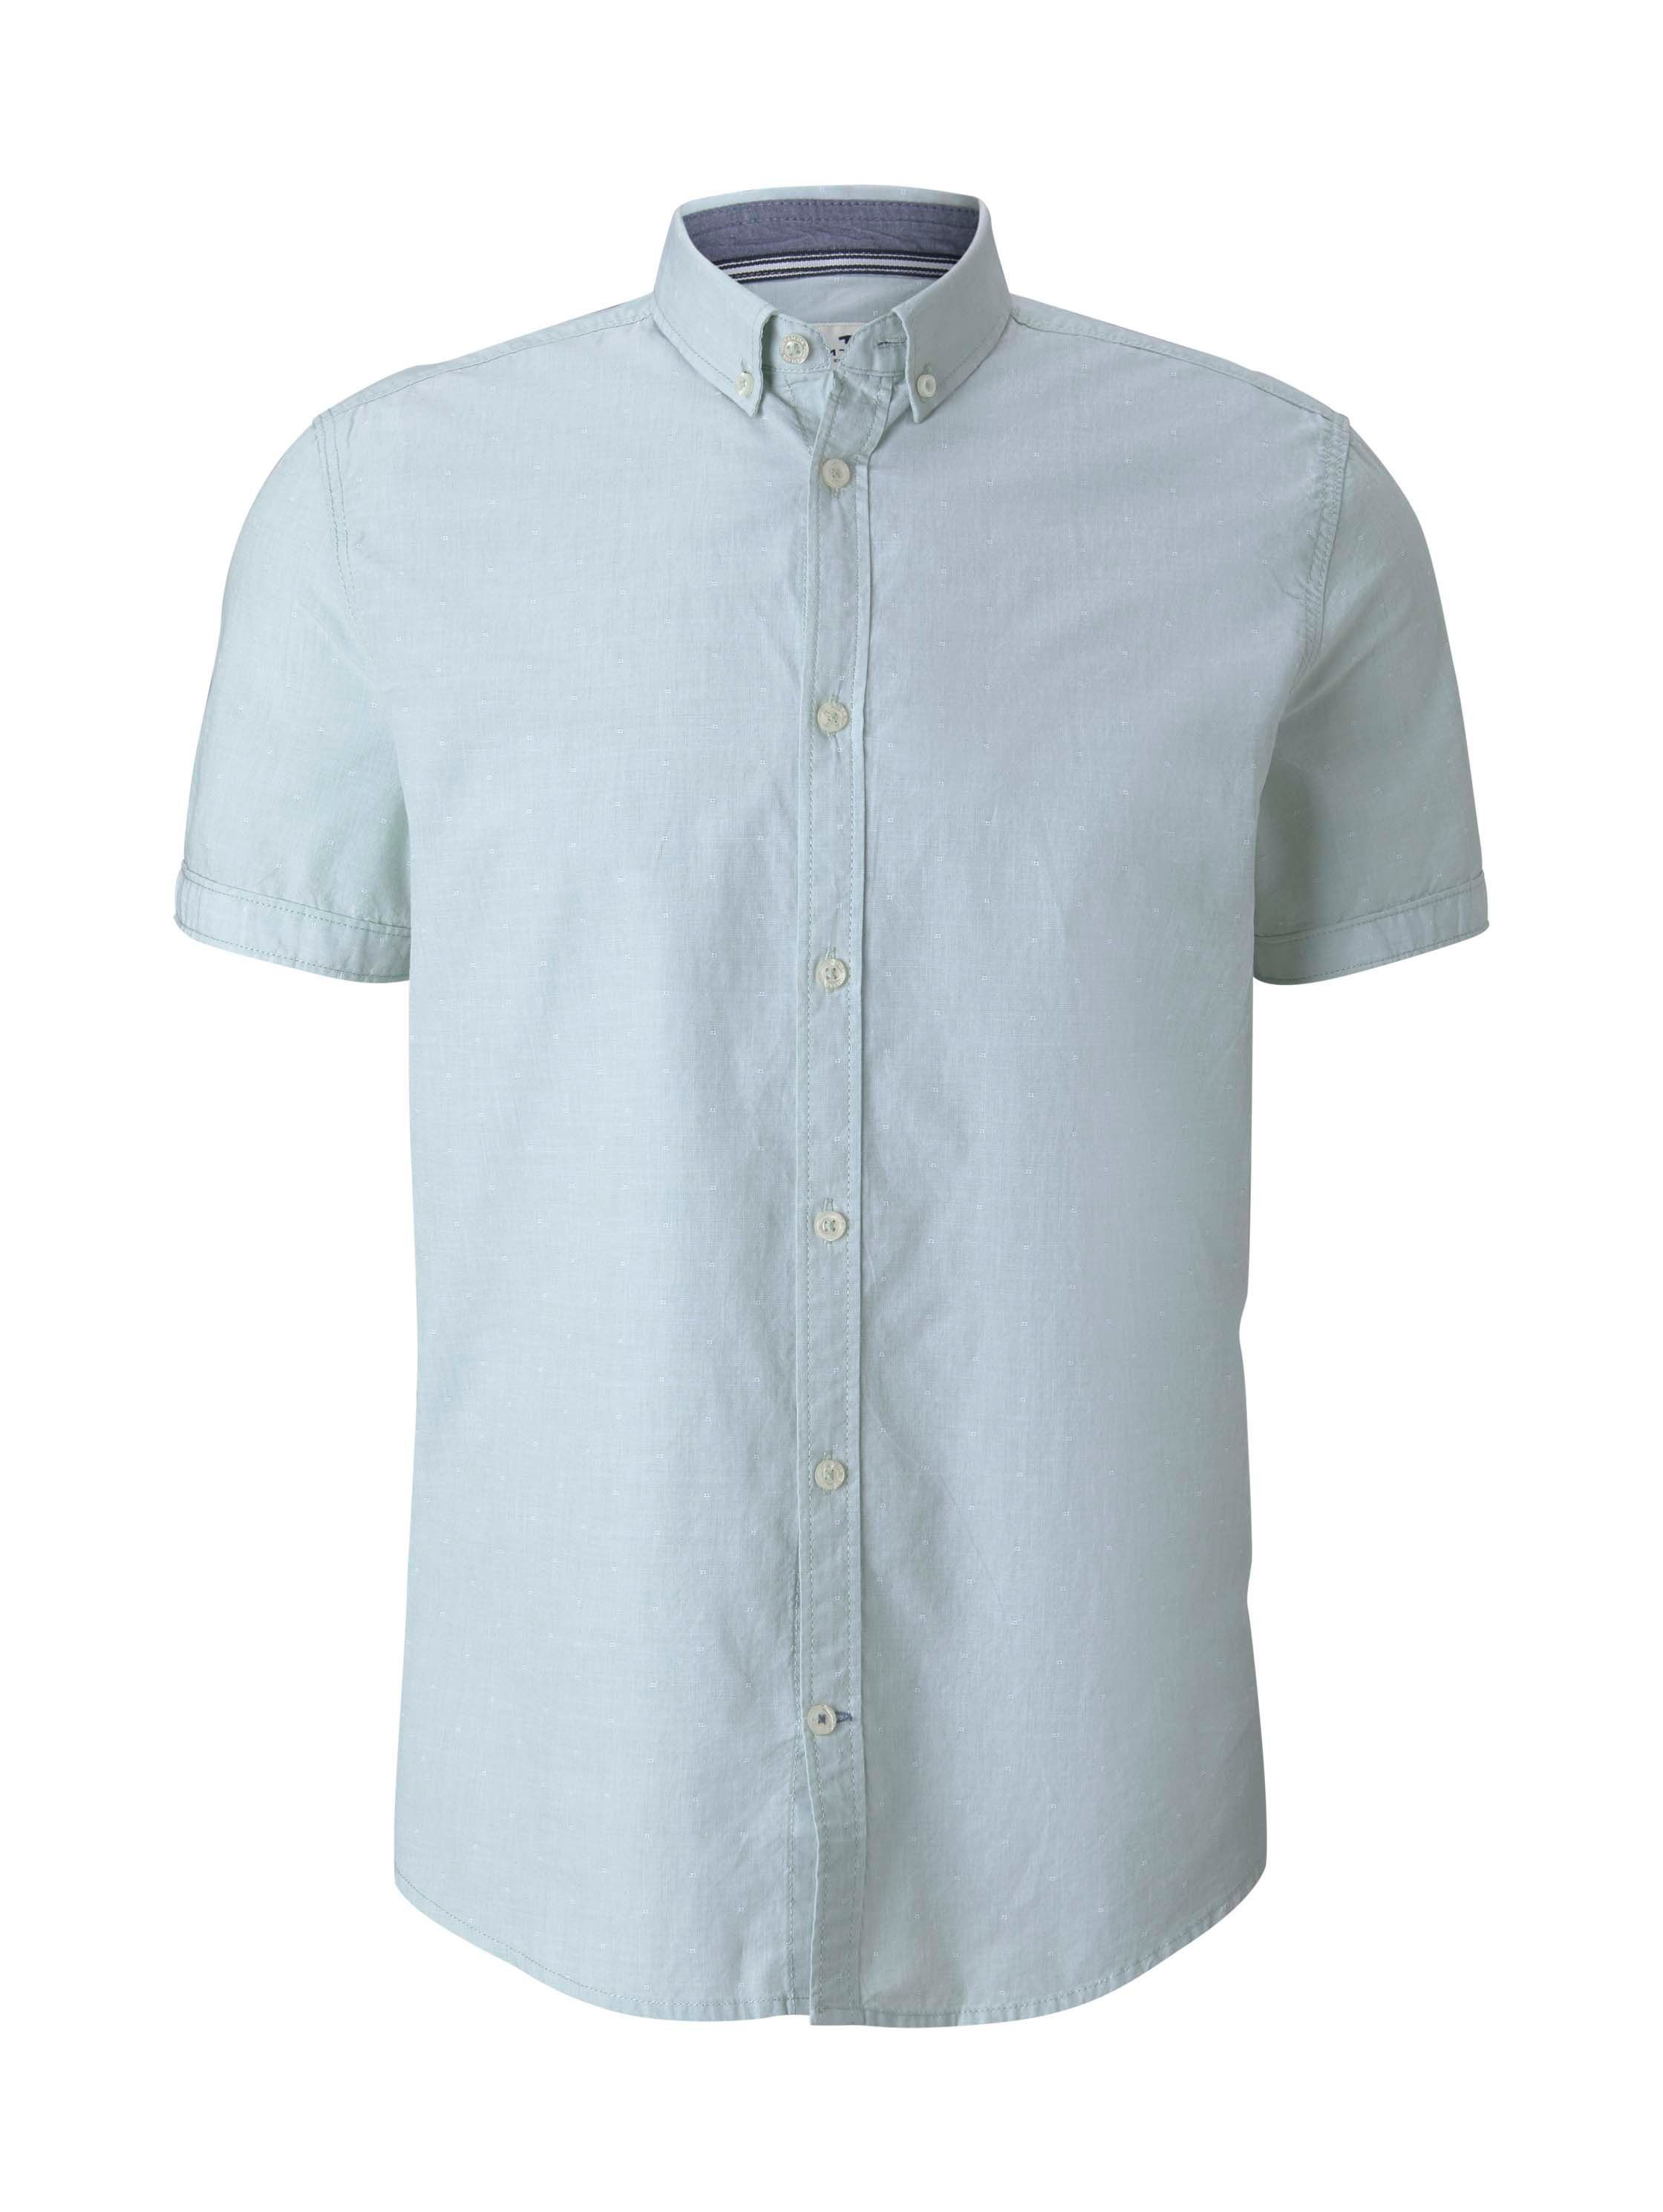 TOM TAILOR Kurzarmshirt green chambray with dobby